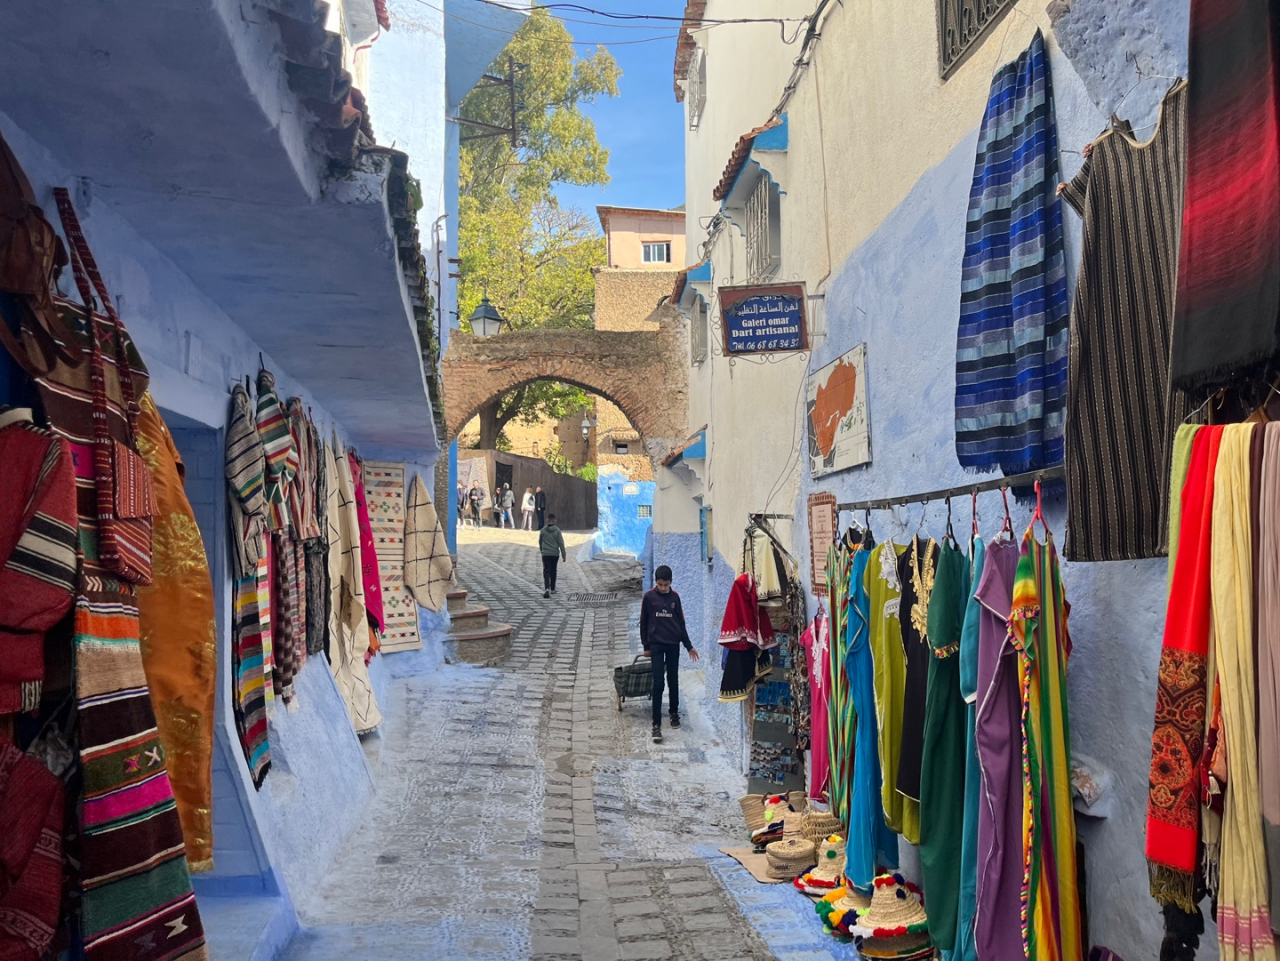 An alley of Chefchaouen, where visitors can buy traditional Moroccan crafts. (Lee Jaeeun/The Korea Herald)